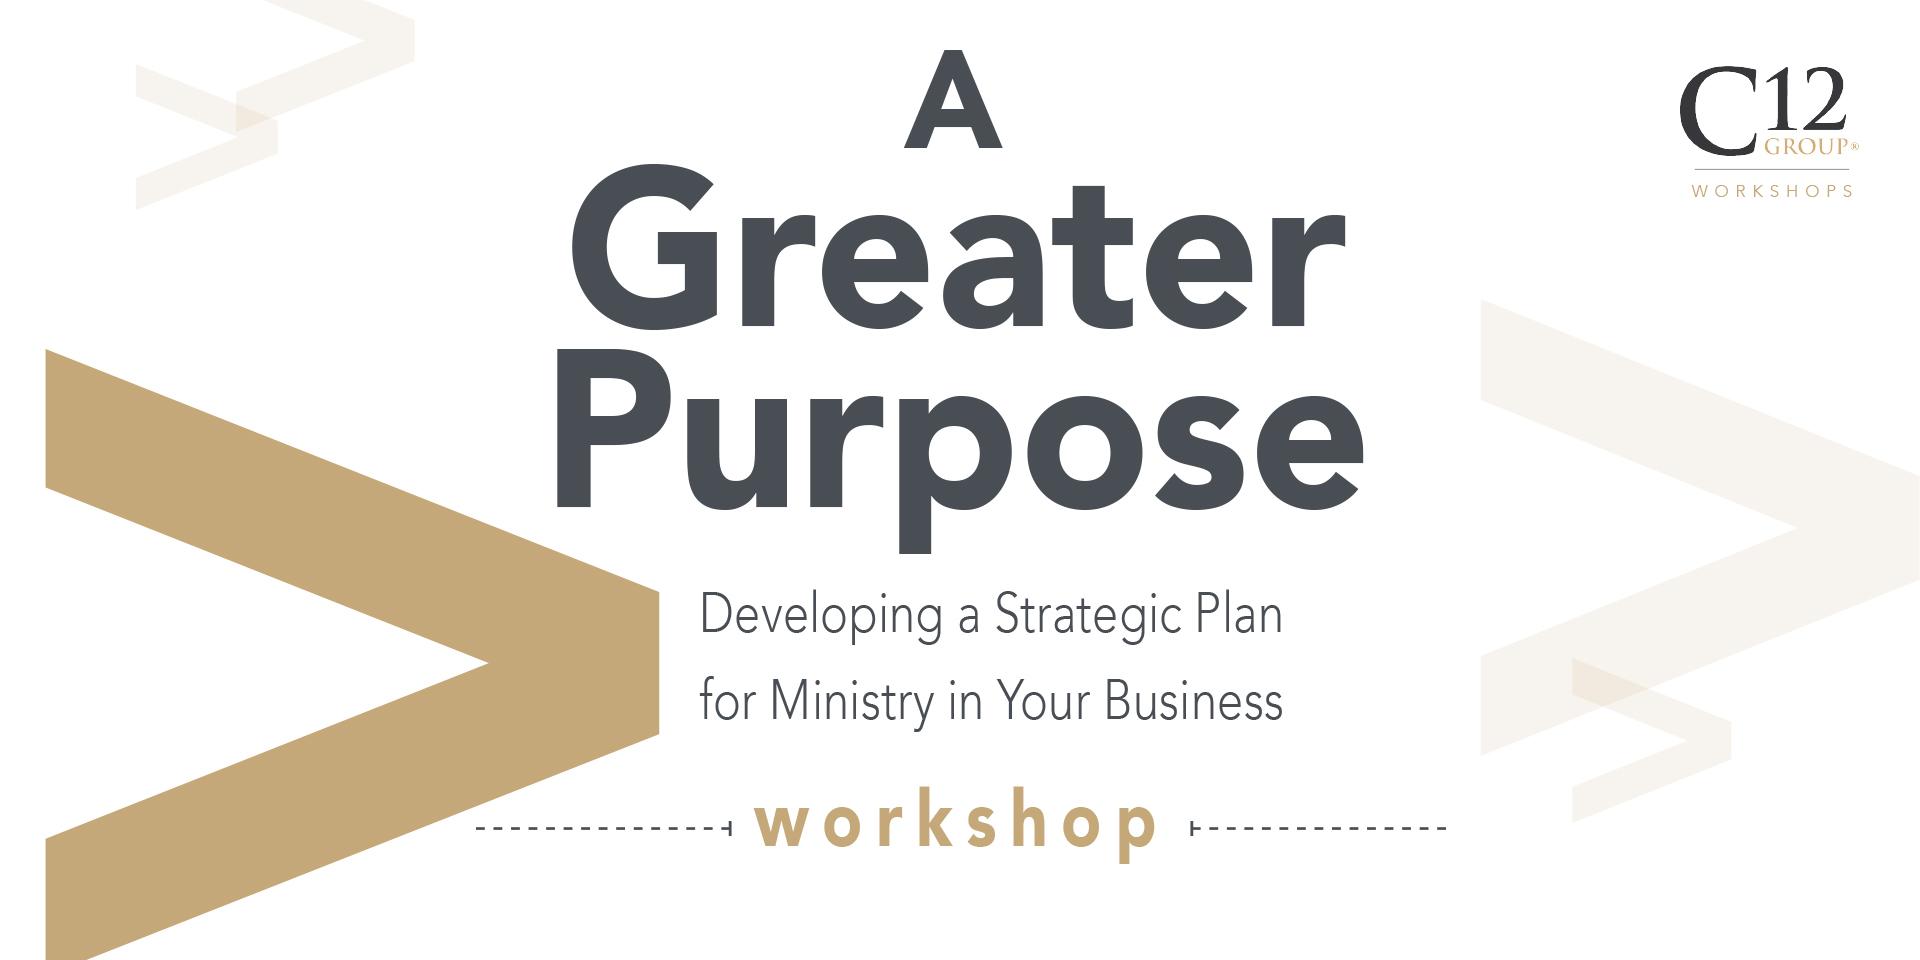 C12 Houston Presents A Greater Purpose Workshop